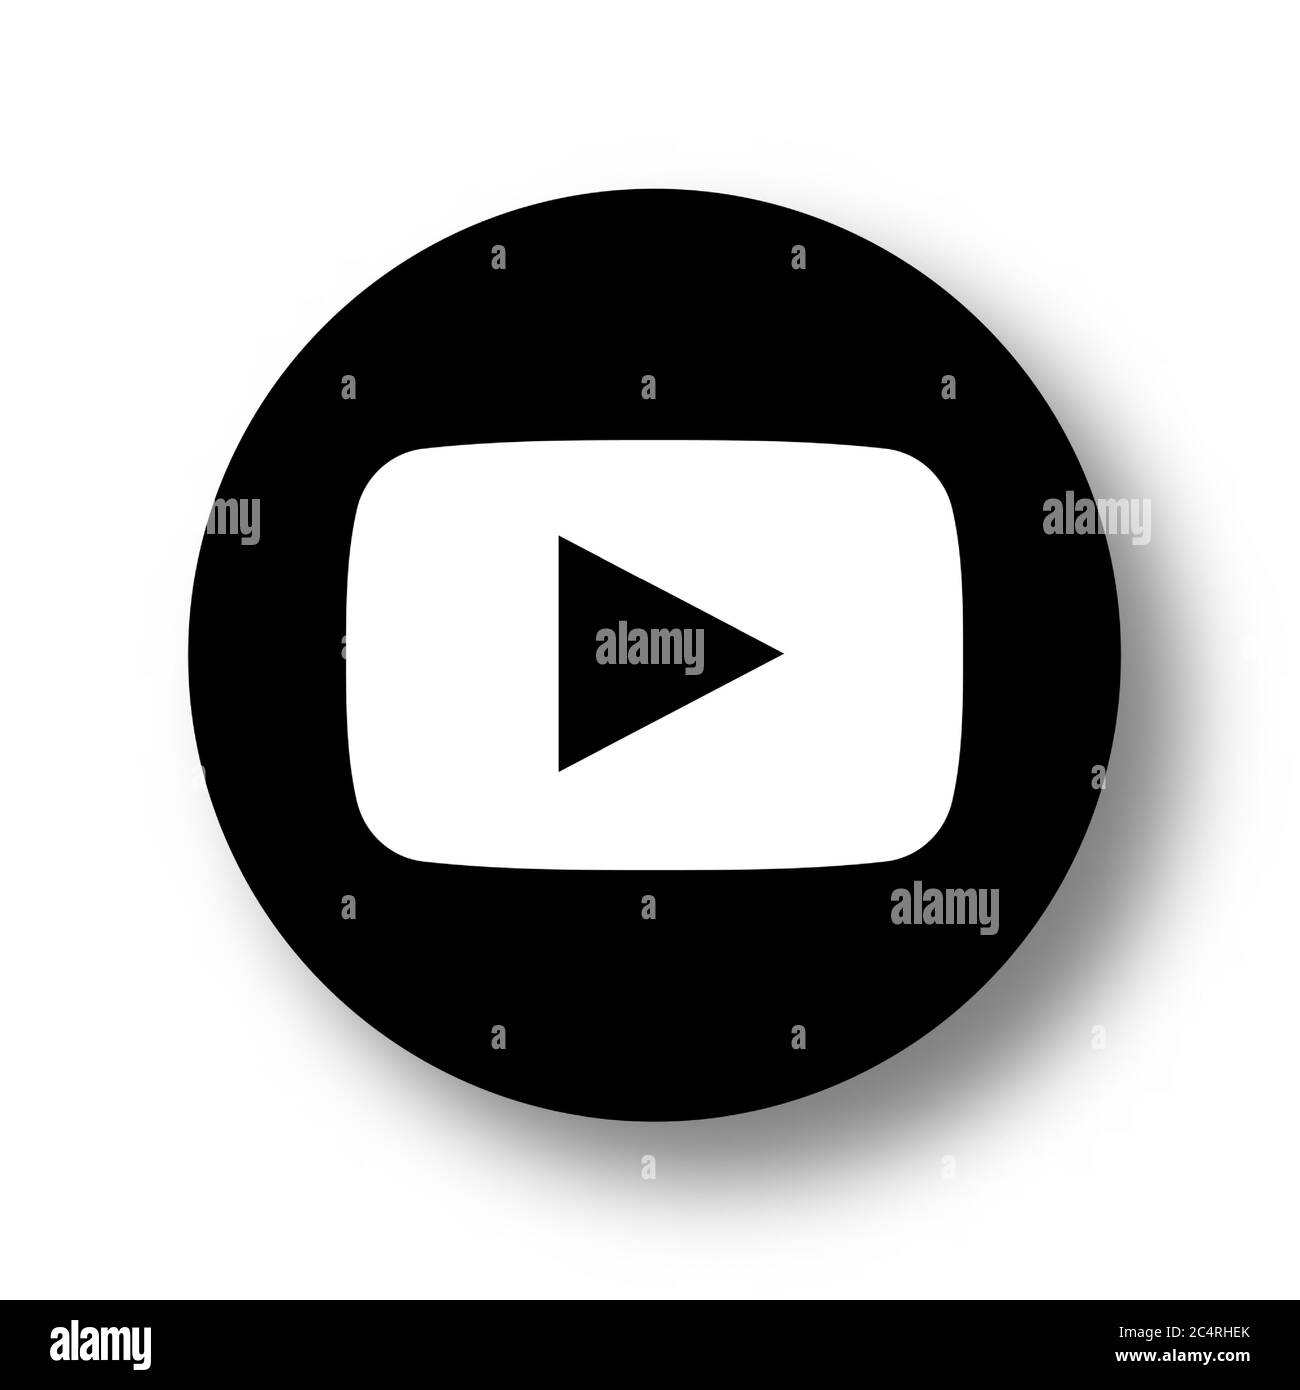 VORONEZH, RUSSIA - JANUARY 31, 2020: Youtube logo black round icon with soft shadow Stock Vector